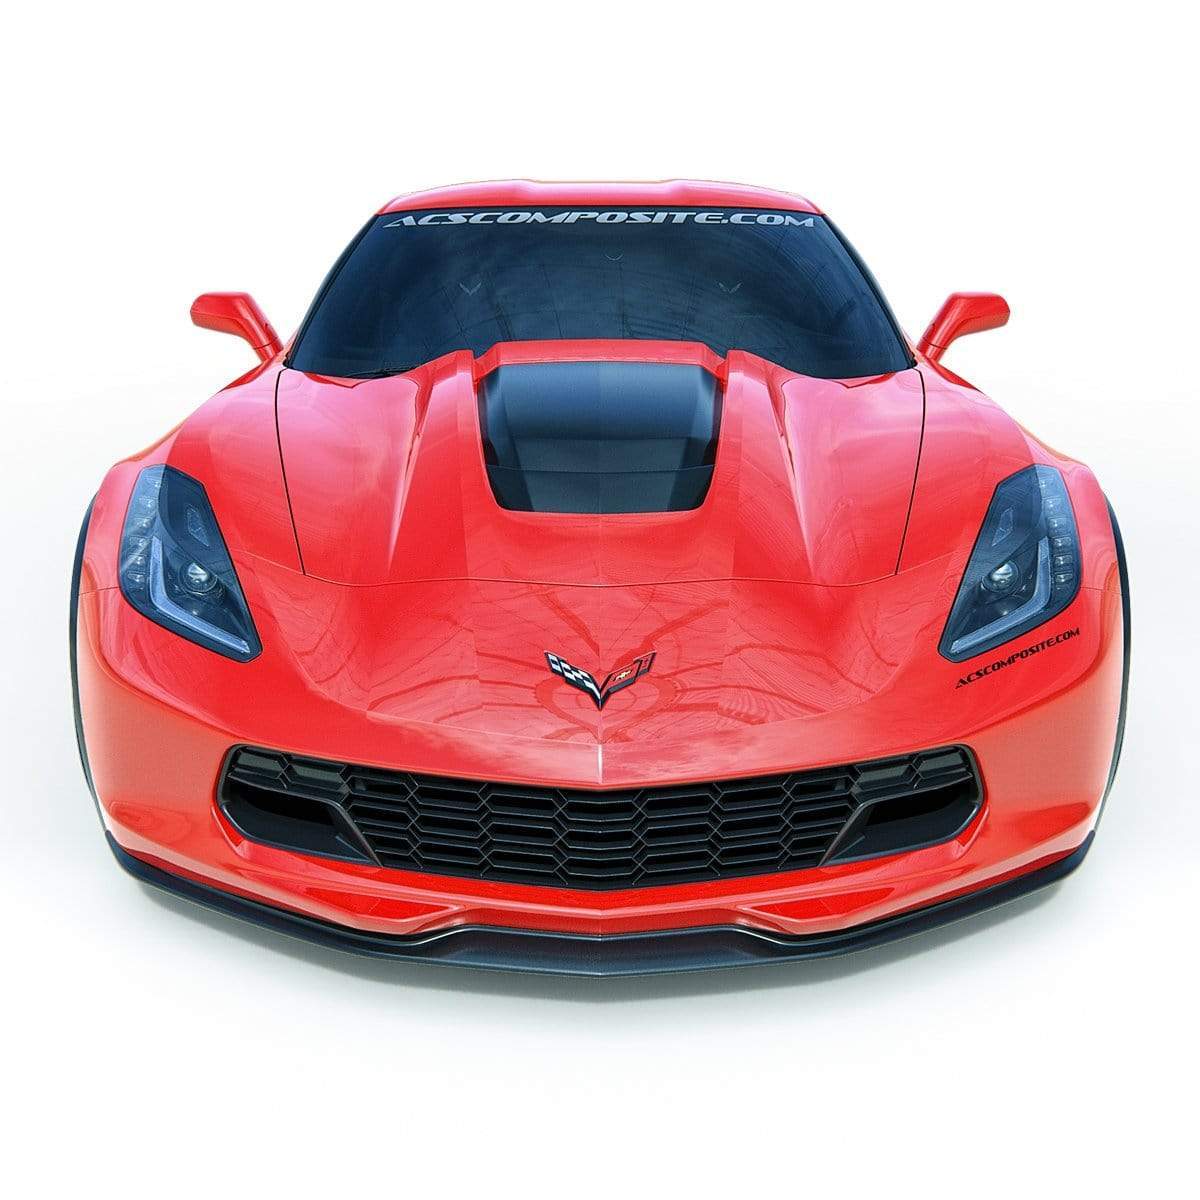 ACS Composite C7-ZR1 Hood for Chevrolet Corvette C7, SKU 45-4-203, with vented extractor system and improved cooling capacity.